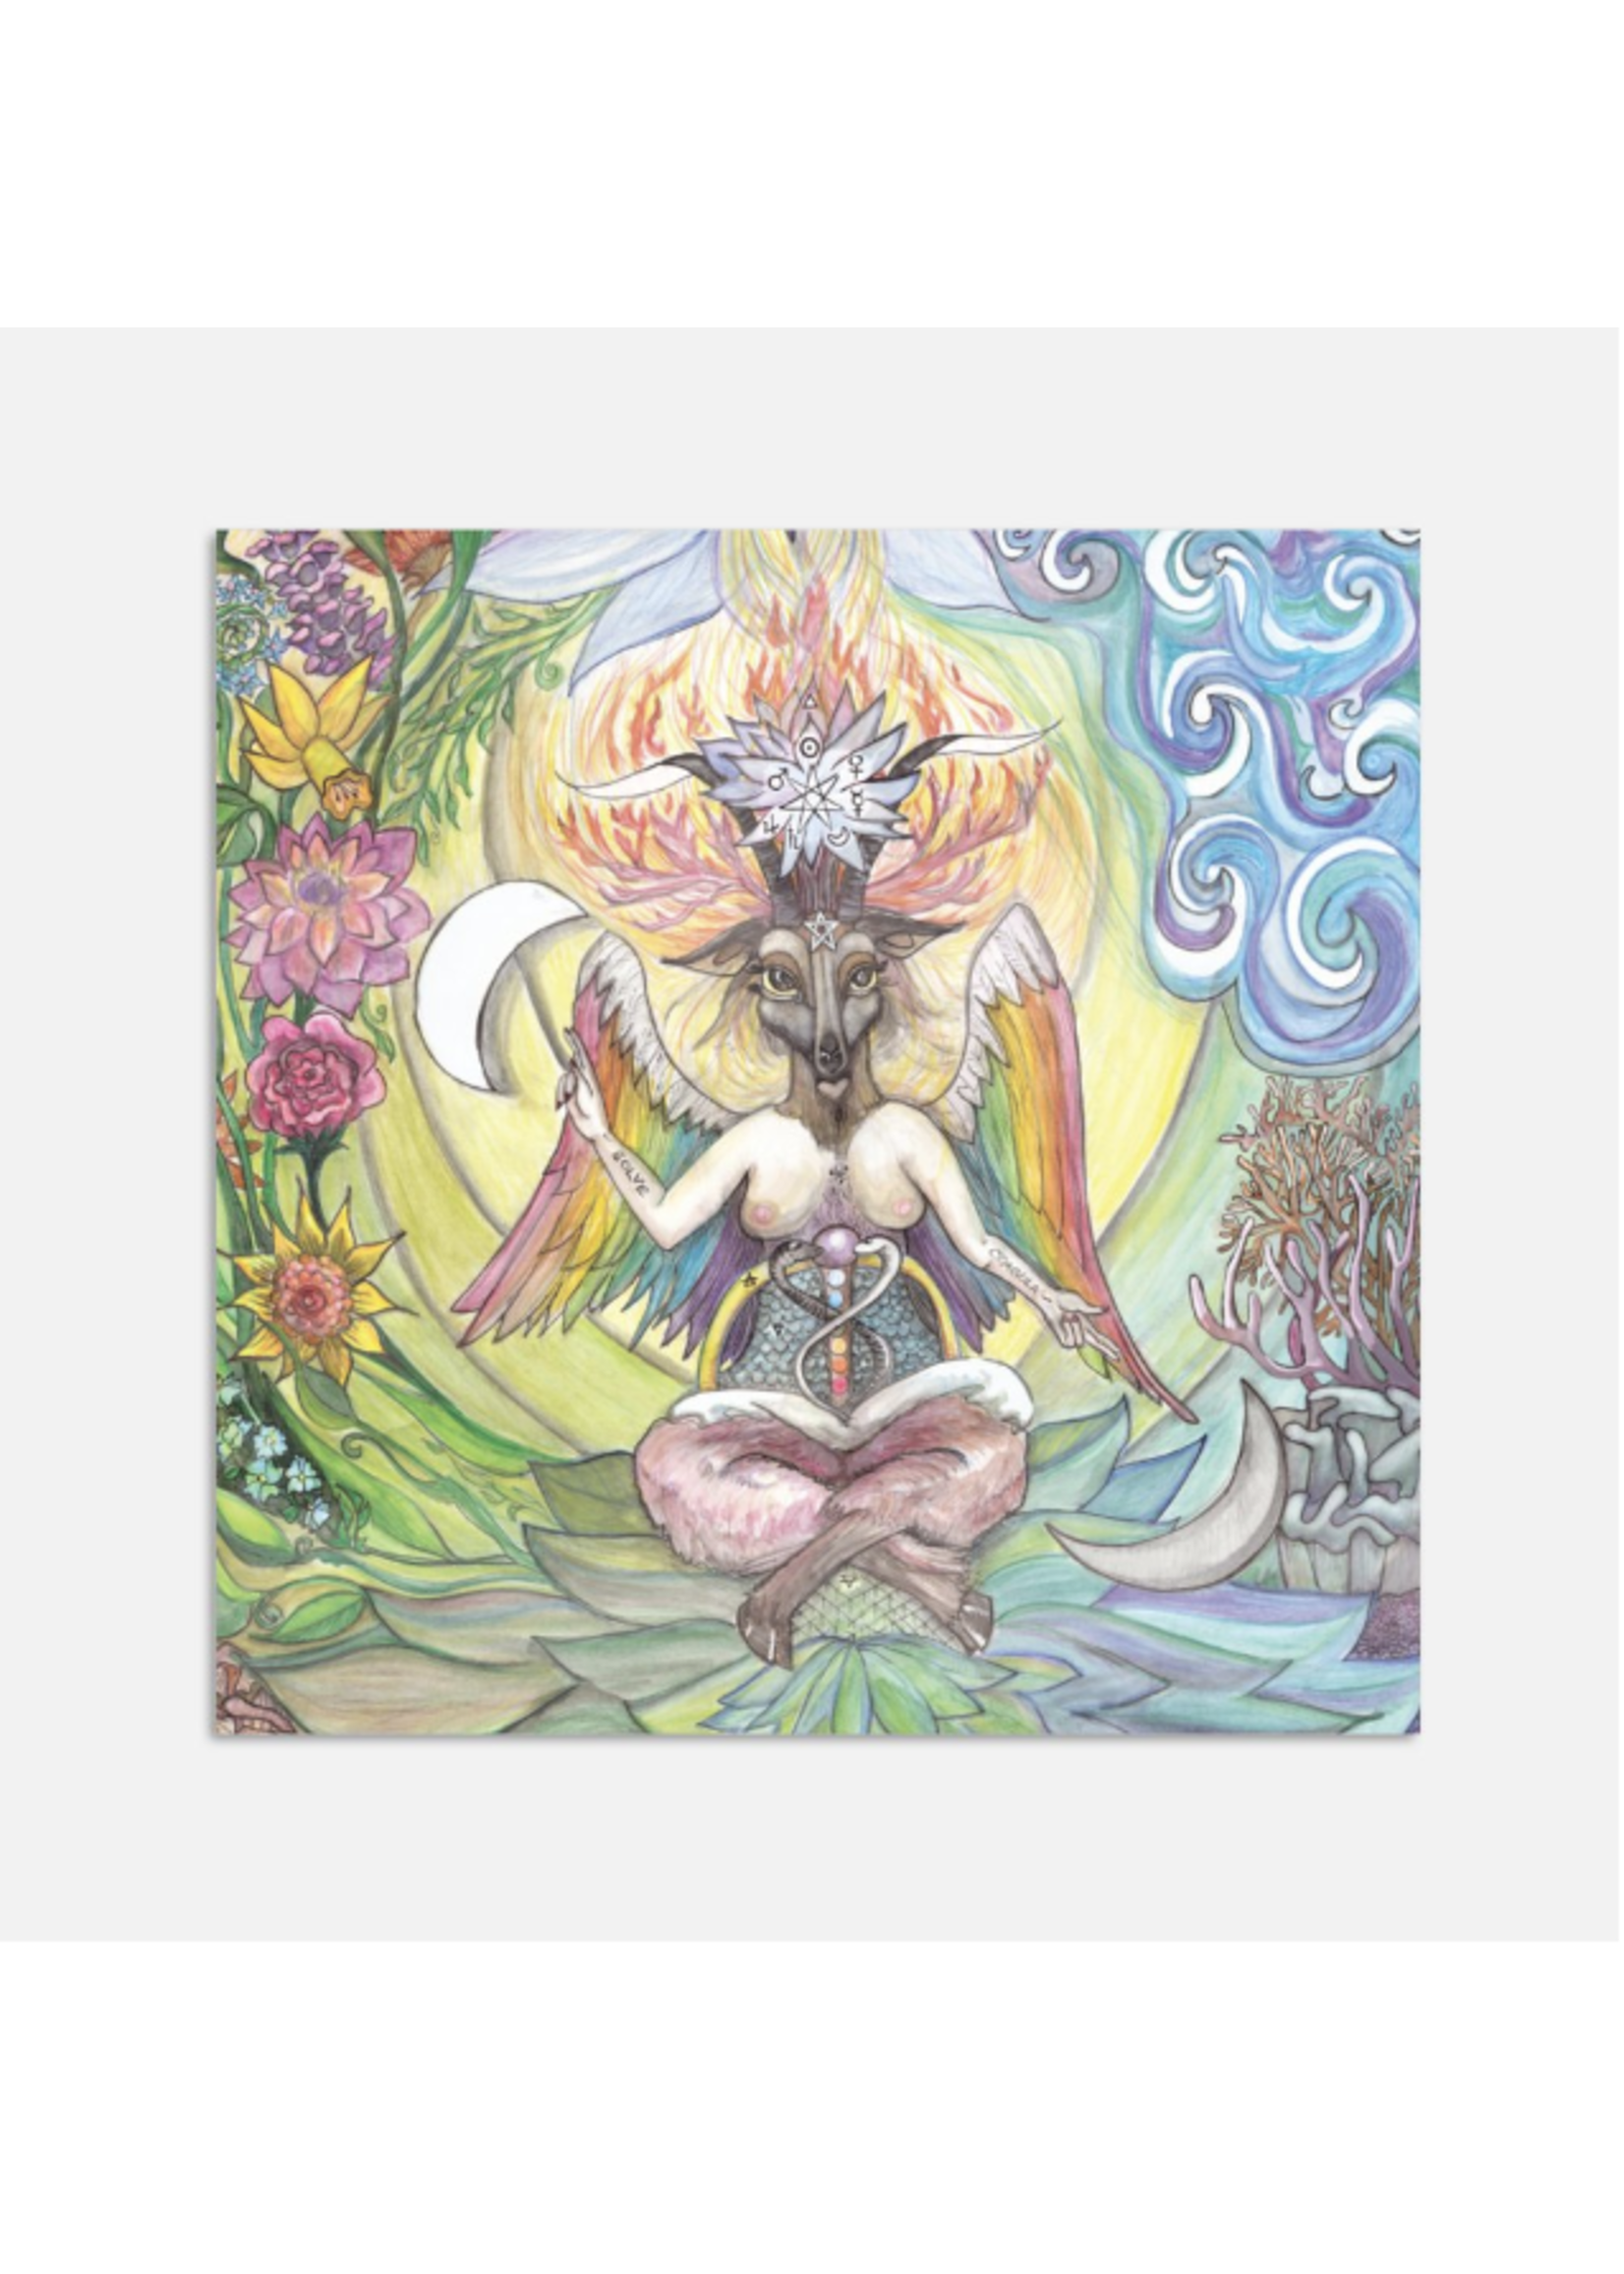 Desire's Attainment Baphomet by Heron Michelle, Window Cling 5"x5"